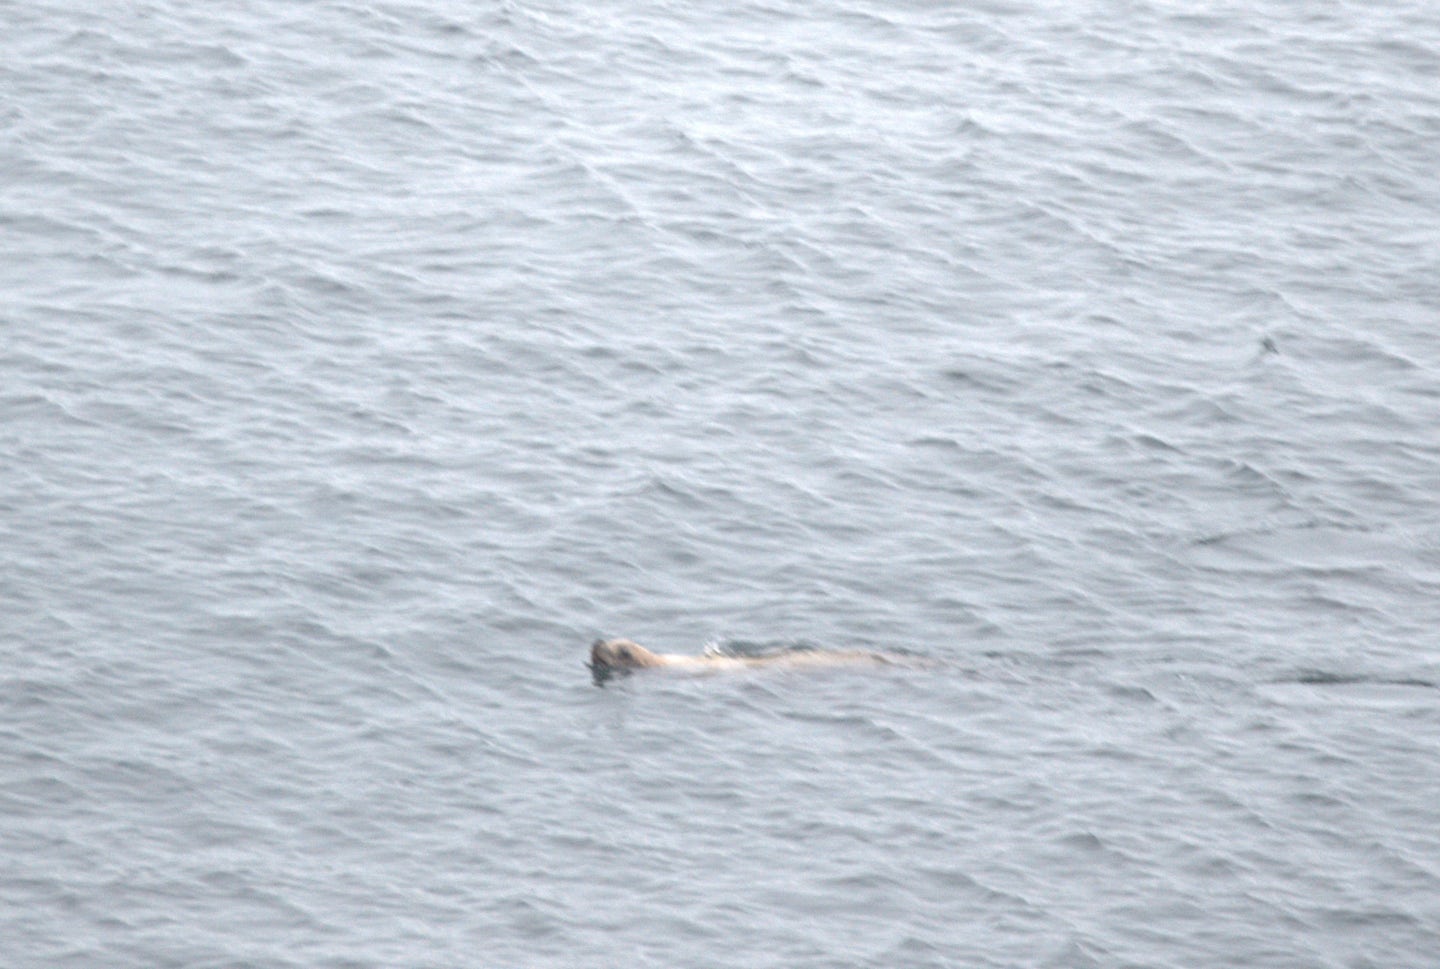 sea lion from our balcony